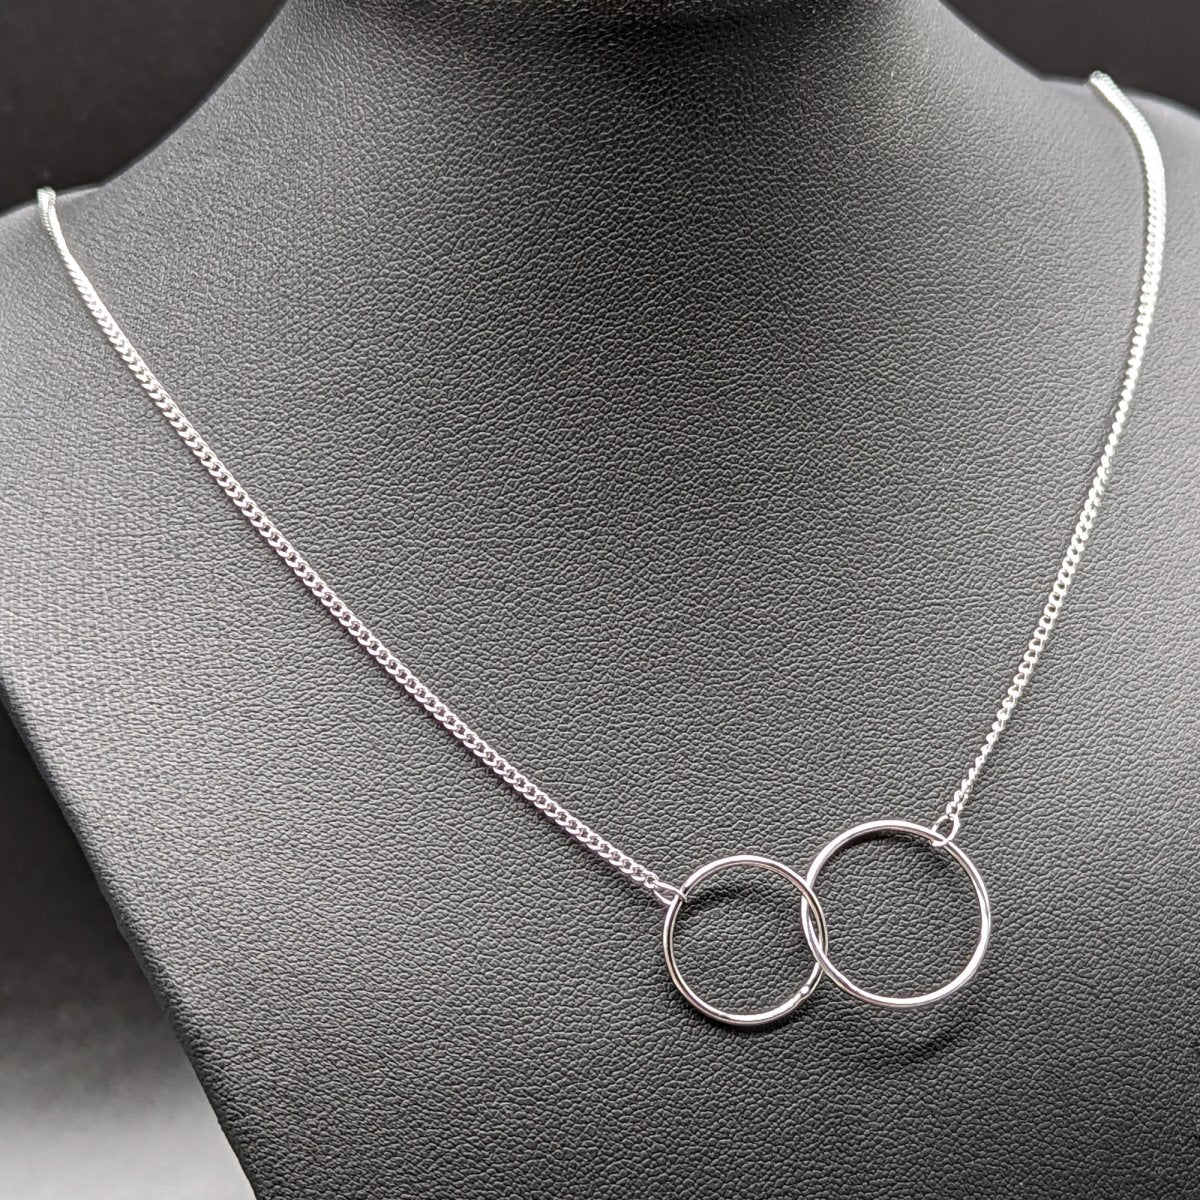 Gift for Soulmate, Girlfriend or Wife - Interlocking Circles Necklace - Meaningful Cards